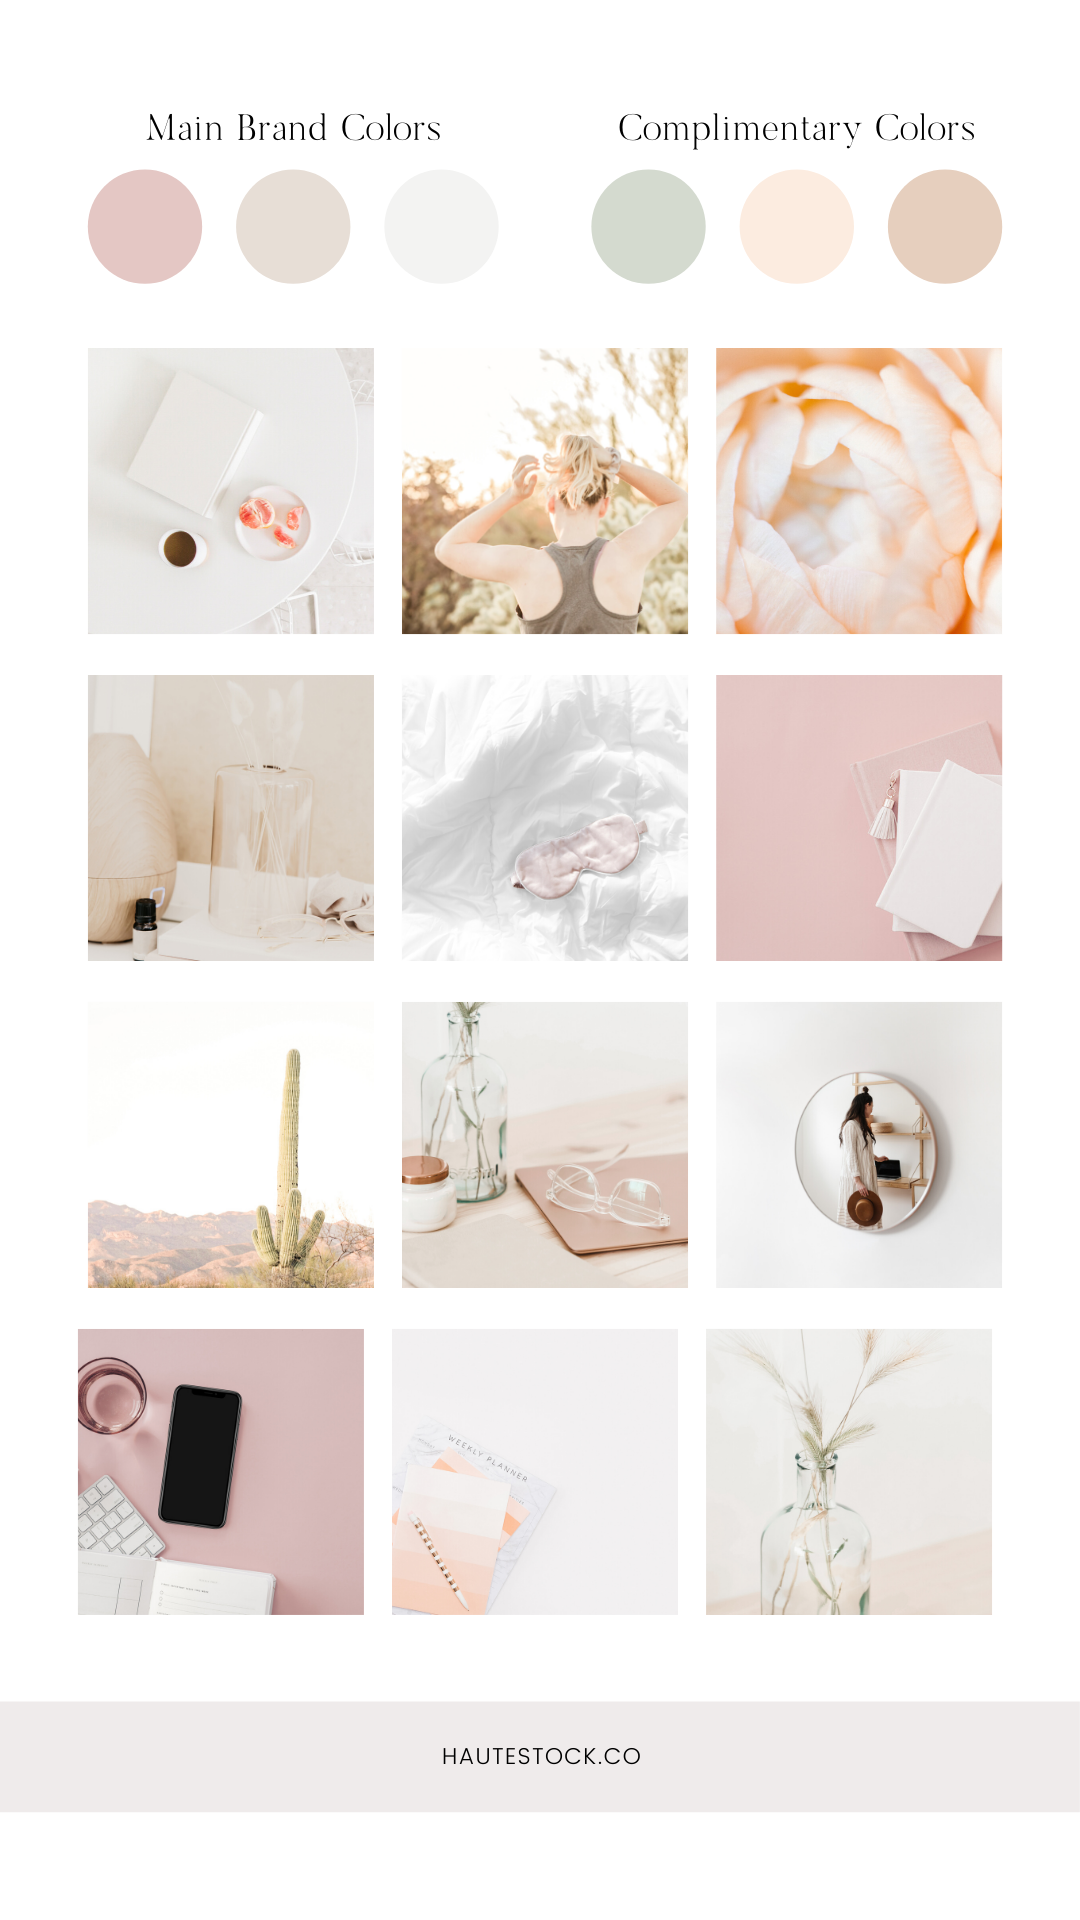 Incorporate images that feature complimentary color palettes but fit your overall vibes in you business' social media to add interest to your feed.